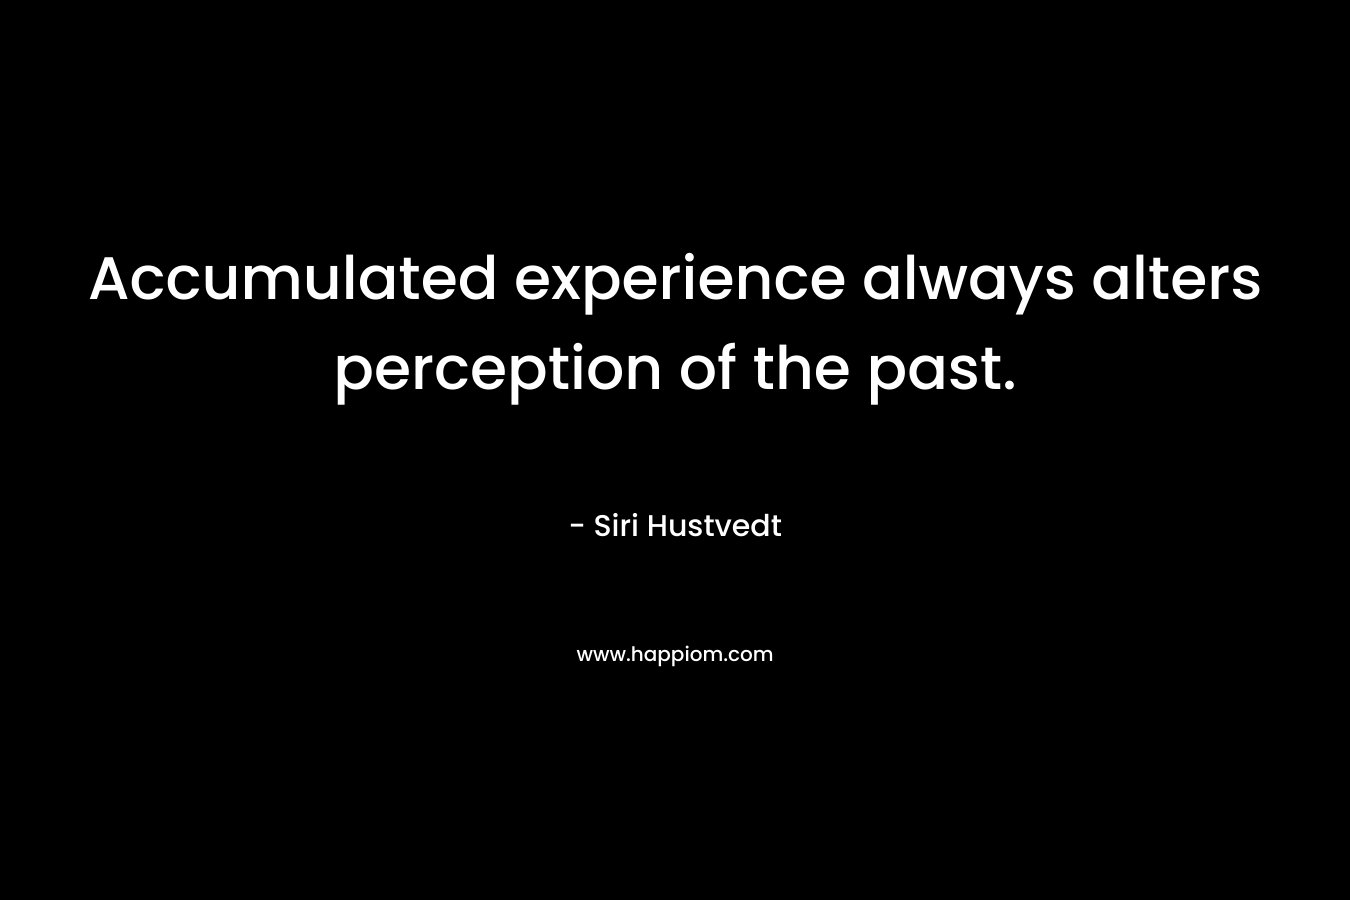 Accumulated experience always alters perception of the past. – Siri Hustvedt